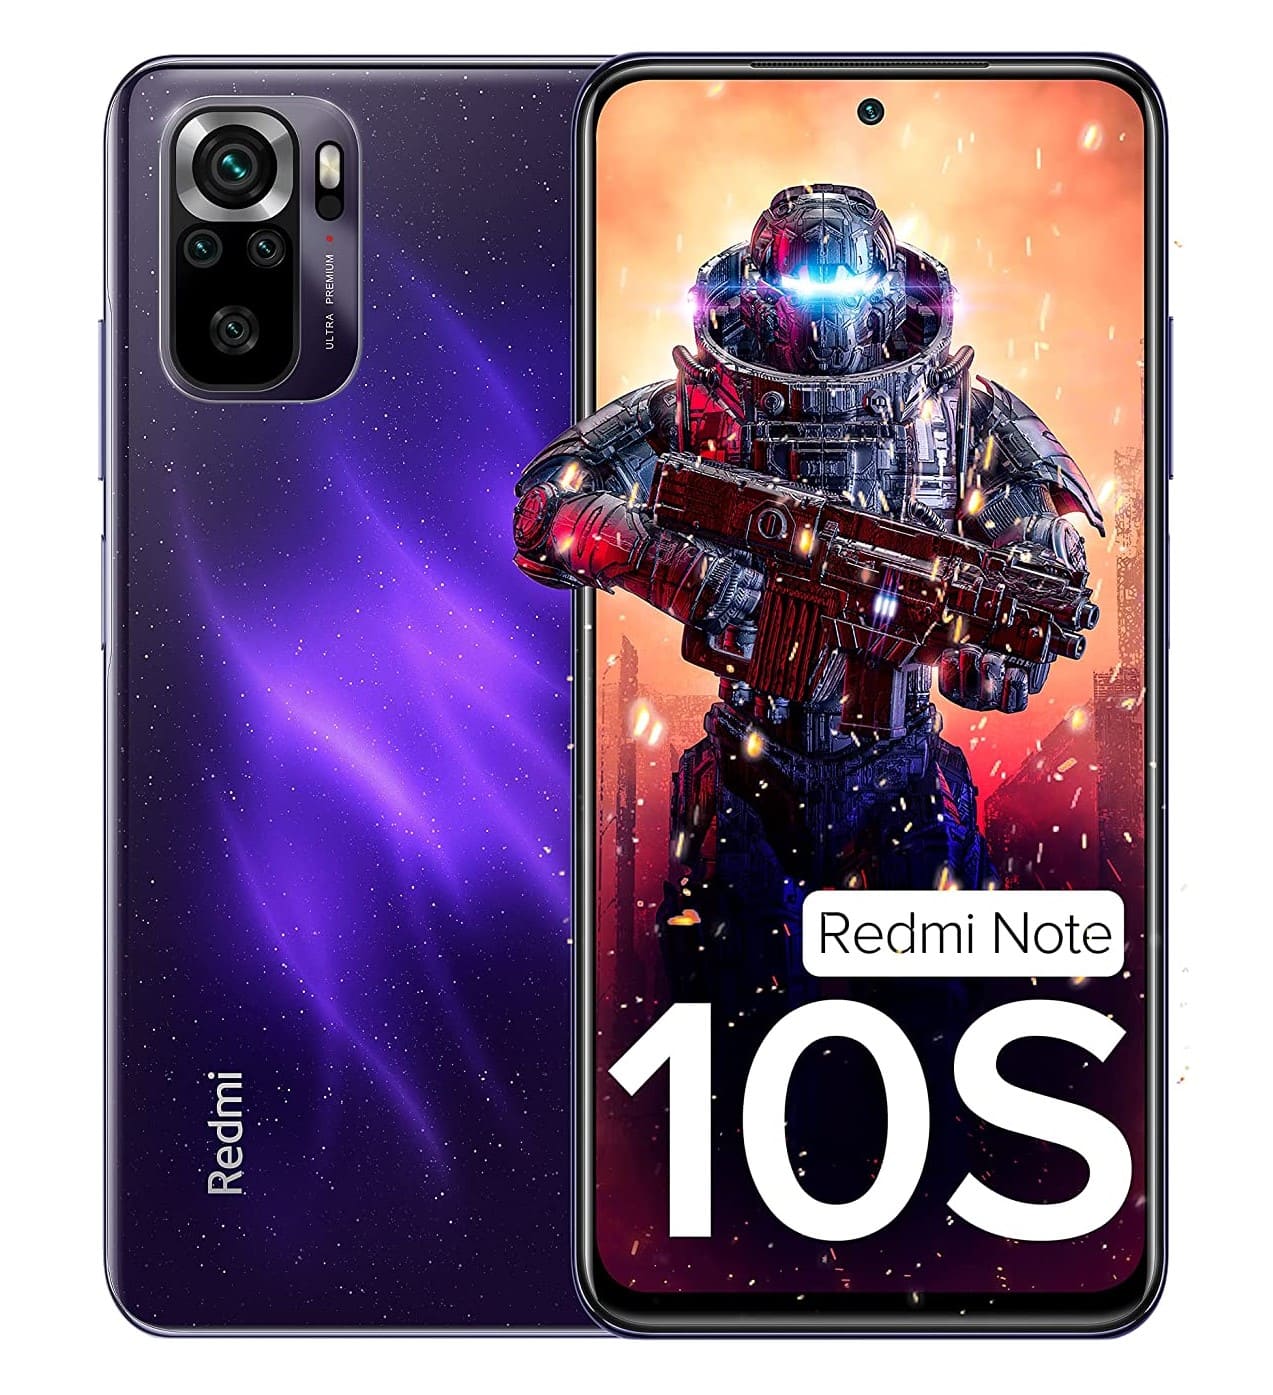 Redmi note 10s is a top rated mobile under 15000